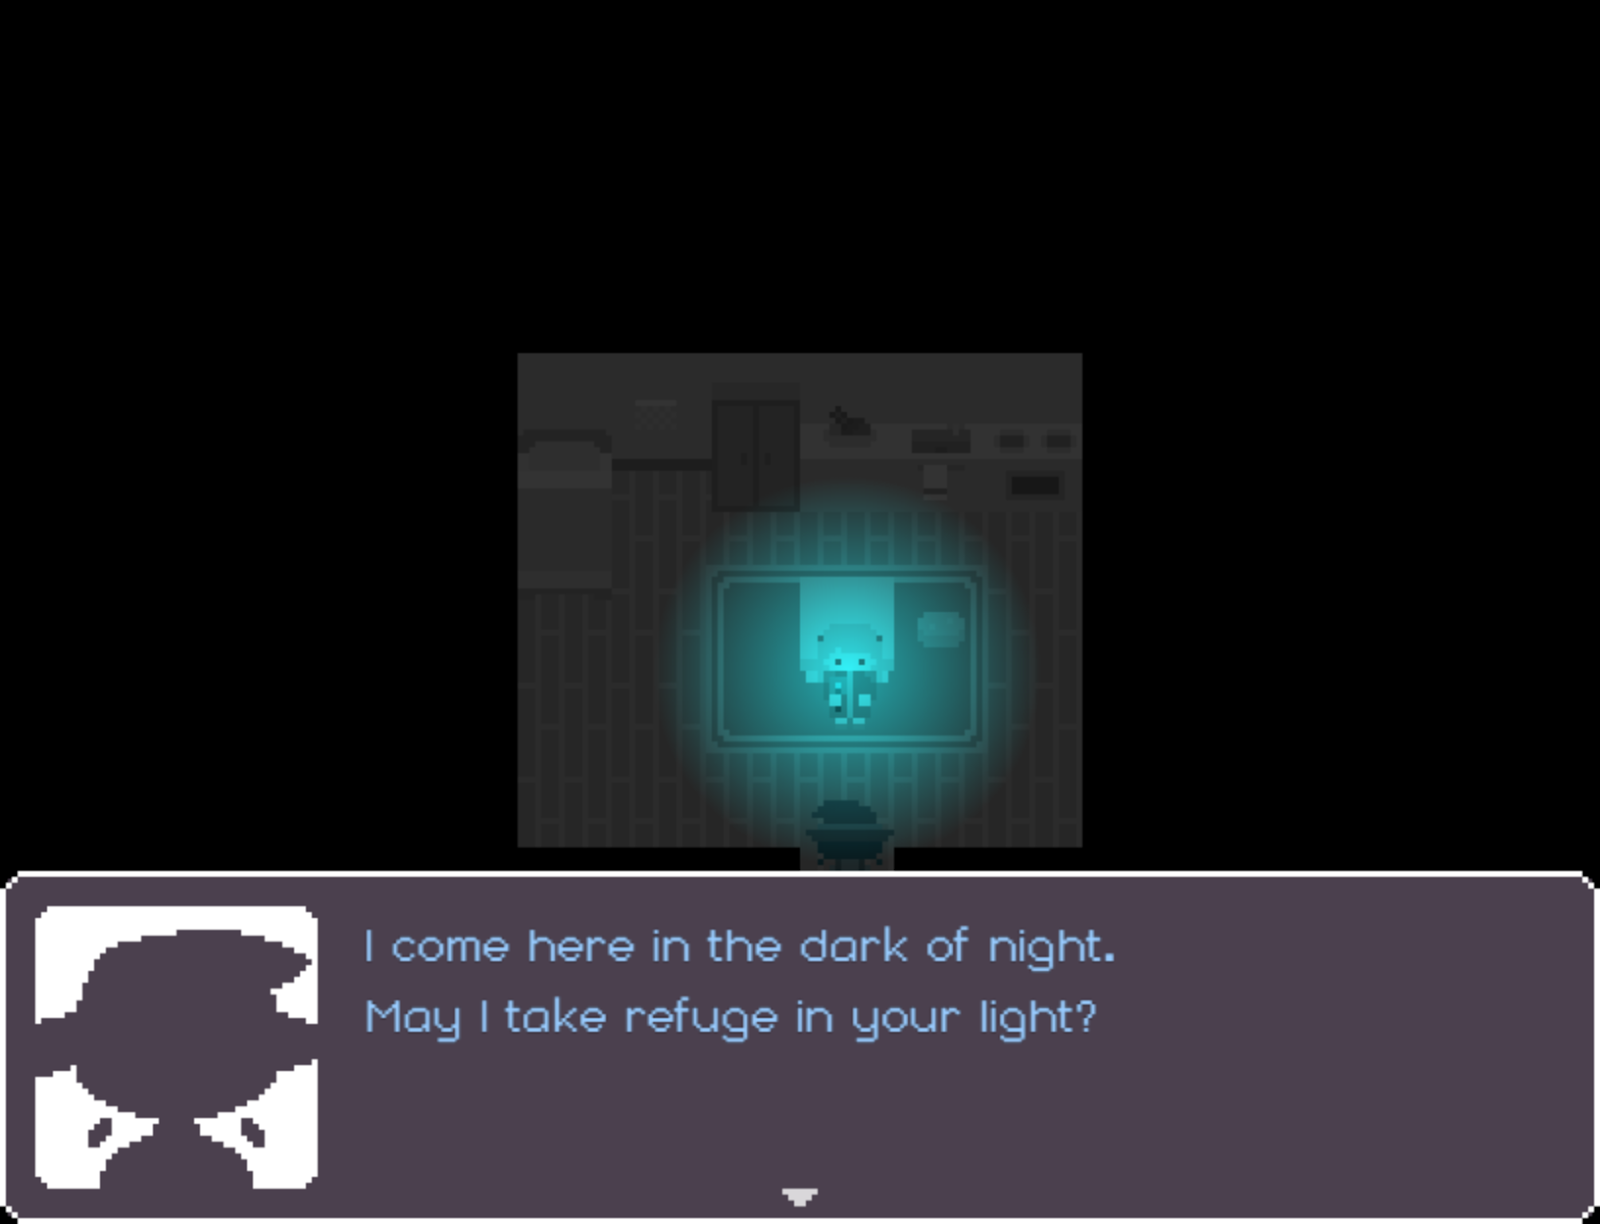 Lilac and Her Light screenshot with a dark mysterious image and a glowing blue light.  From the Yuri Itch.io Game tag.